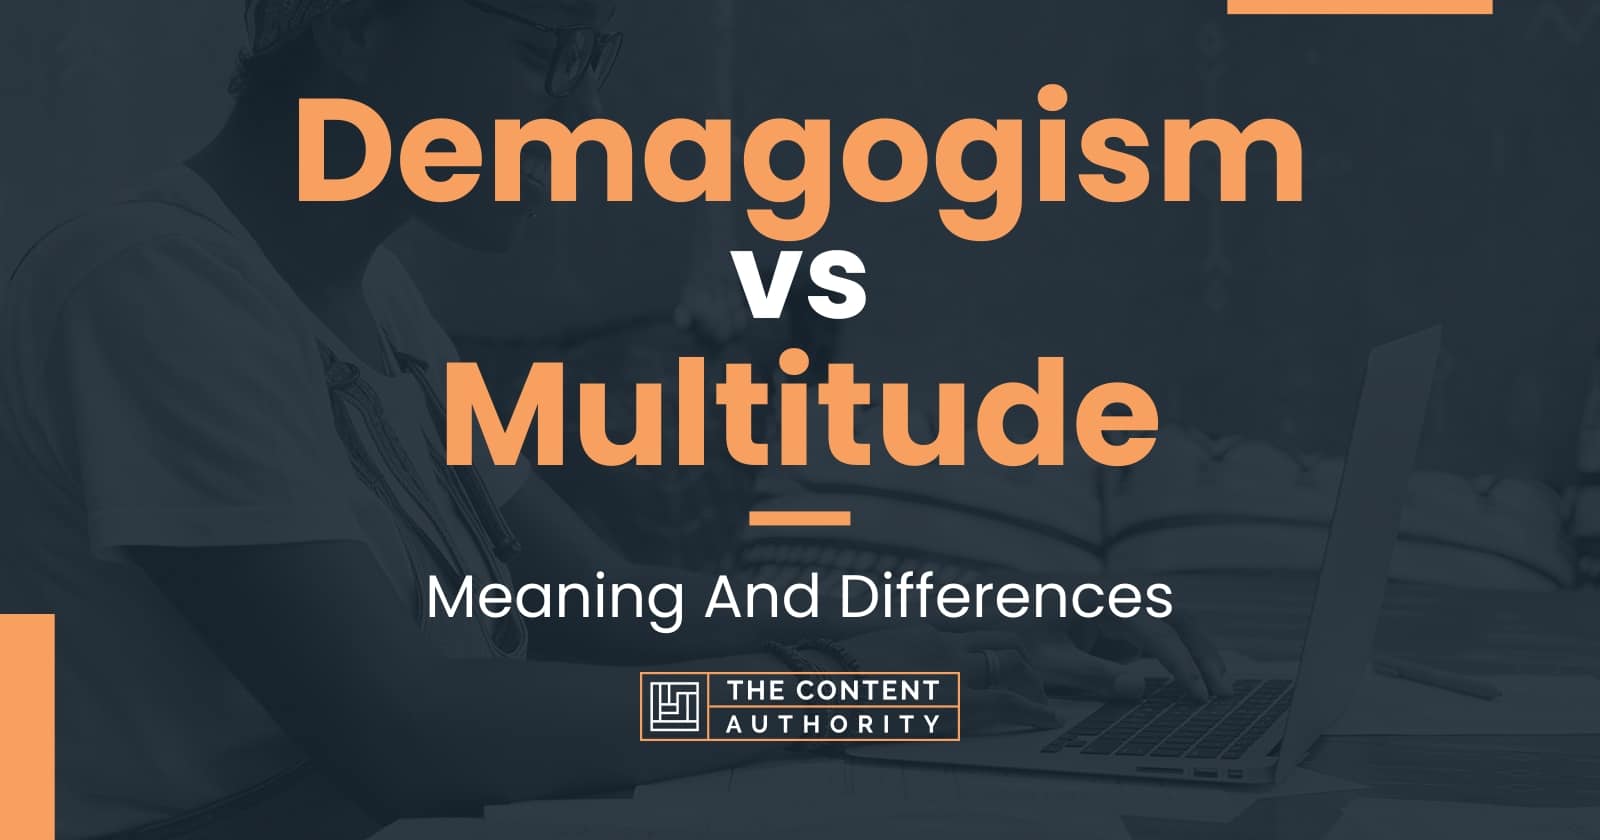 Demagogism vs Multitude: Meaning And Differences